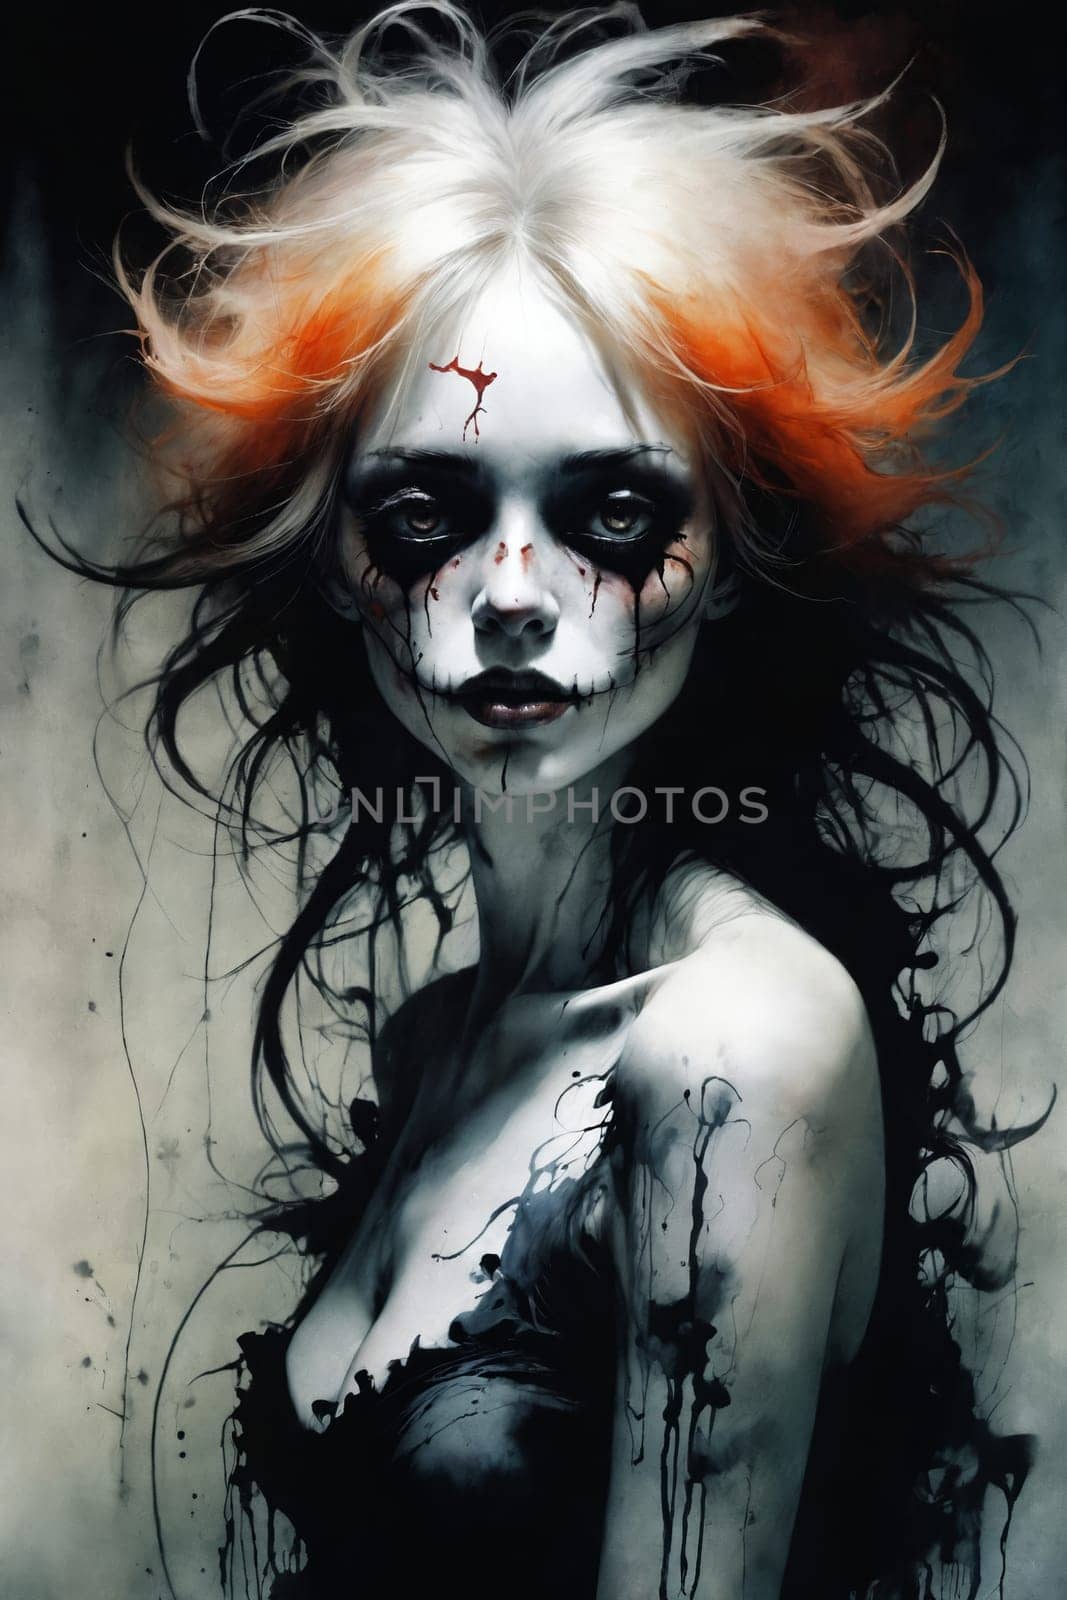 The Turmoil Within: Dramatic Hair and Splashed Colors Portrait by Andre1ns